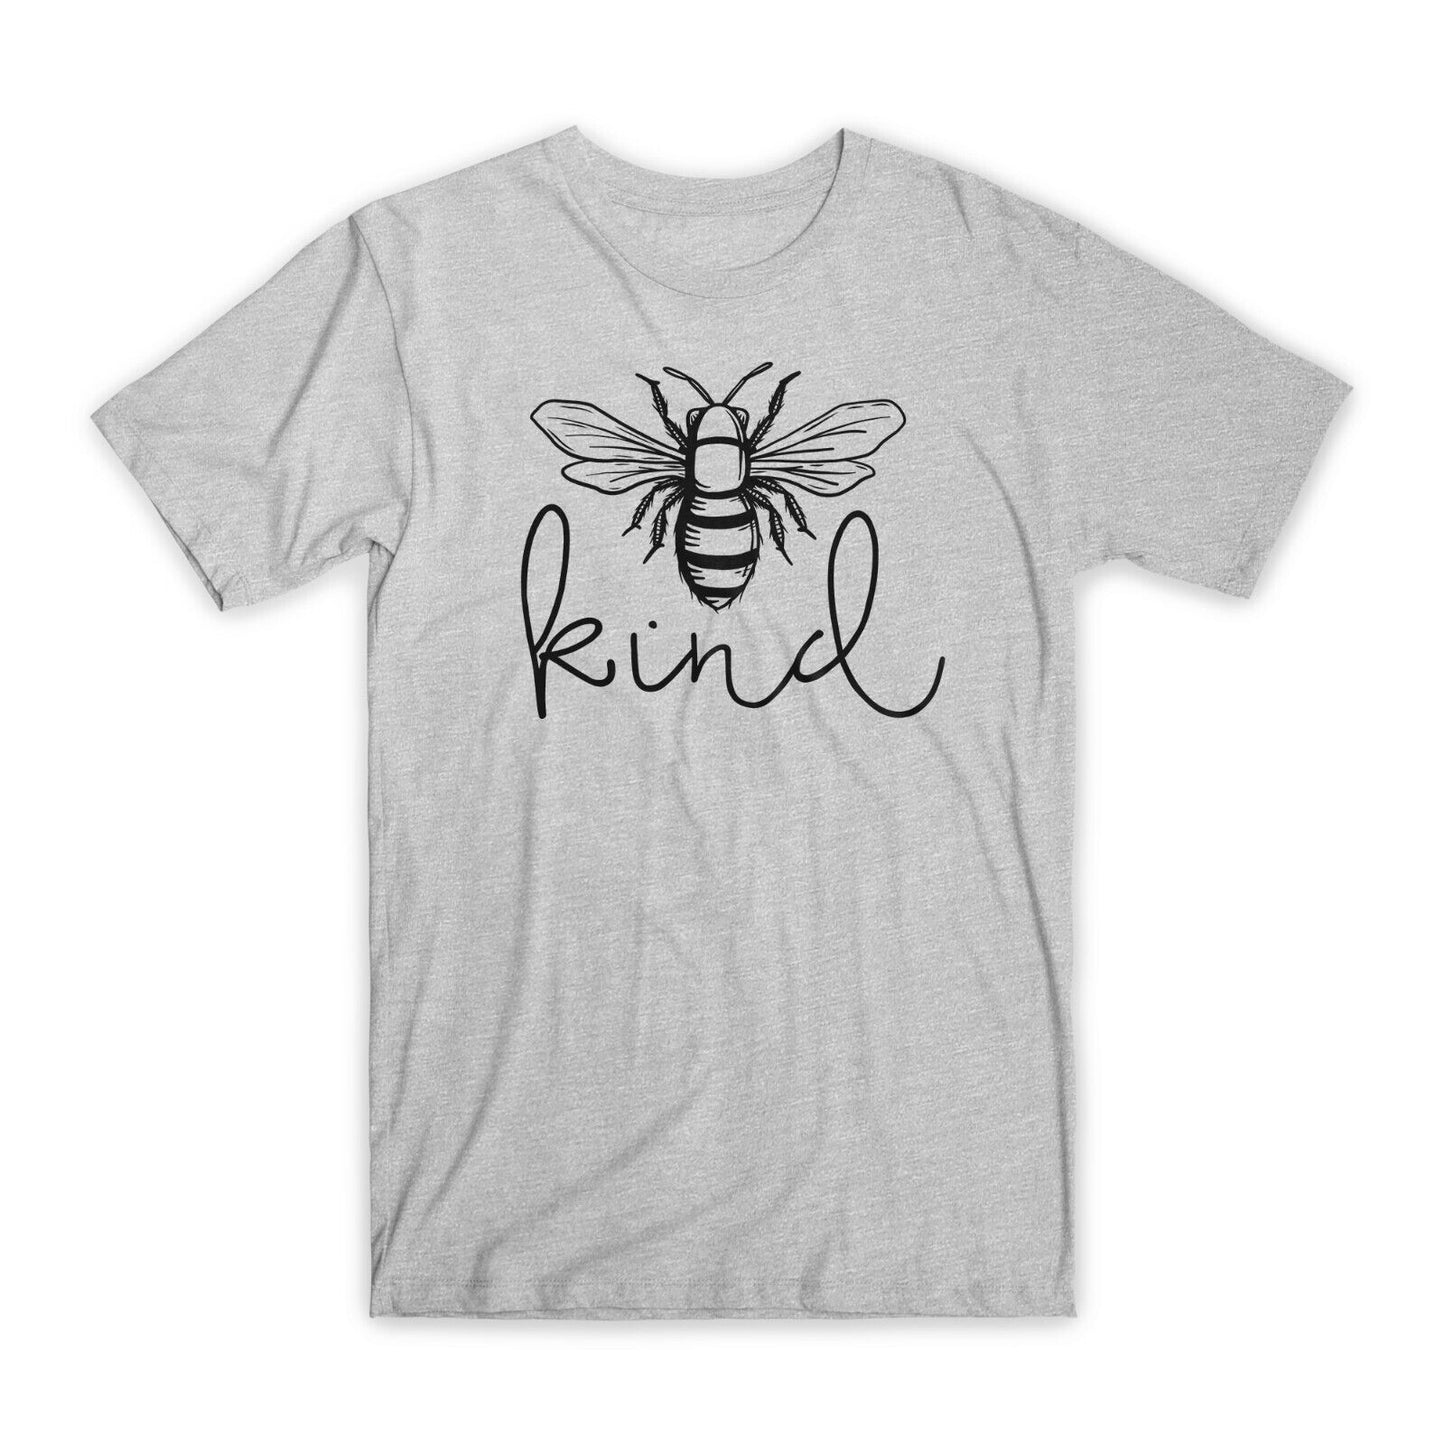 Bee Kind Print T-Shirt Premium Soft Cotton Crew Neck Funny Tees Novelty Gift NEW